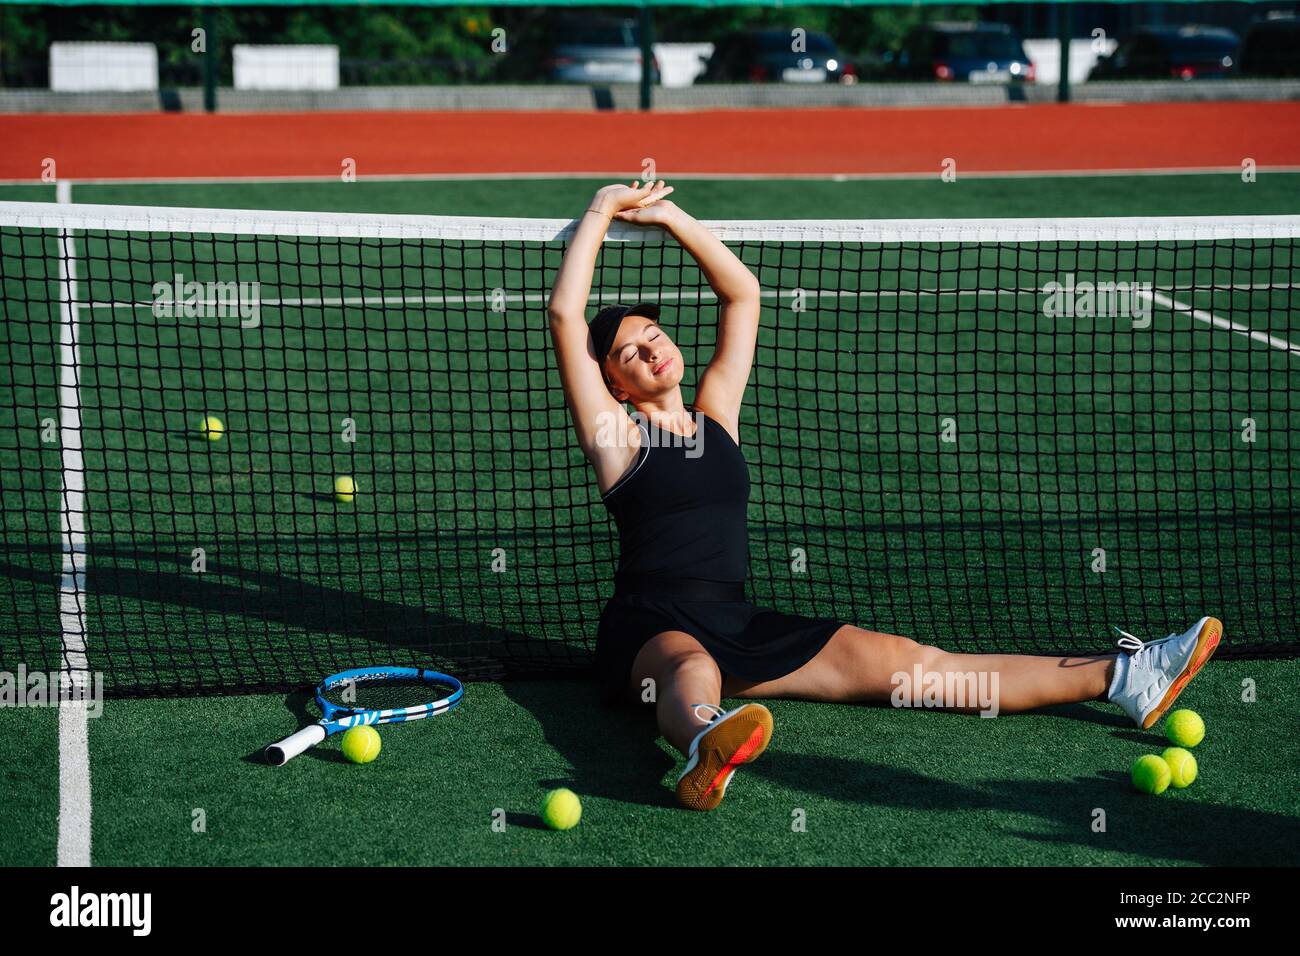 Stretching teenage girl sitting on a tennis court, eyes closed. Stock Photo